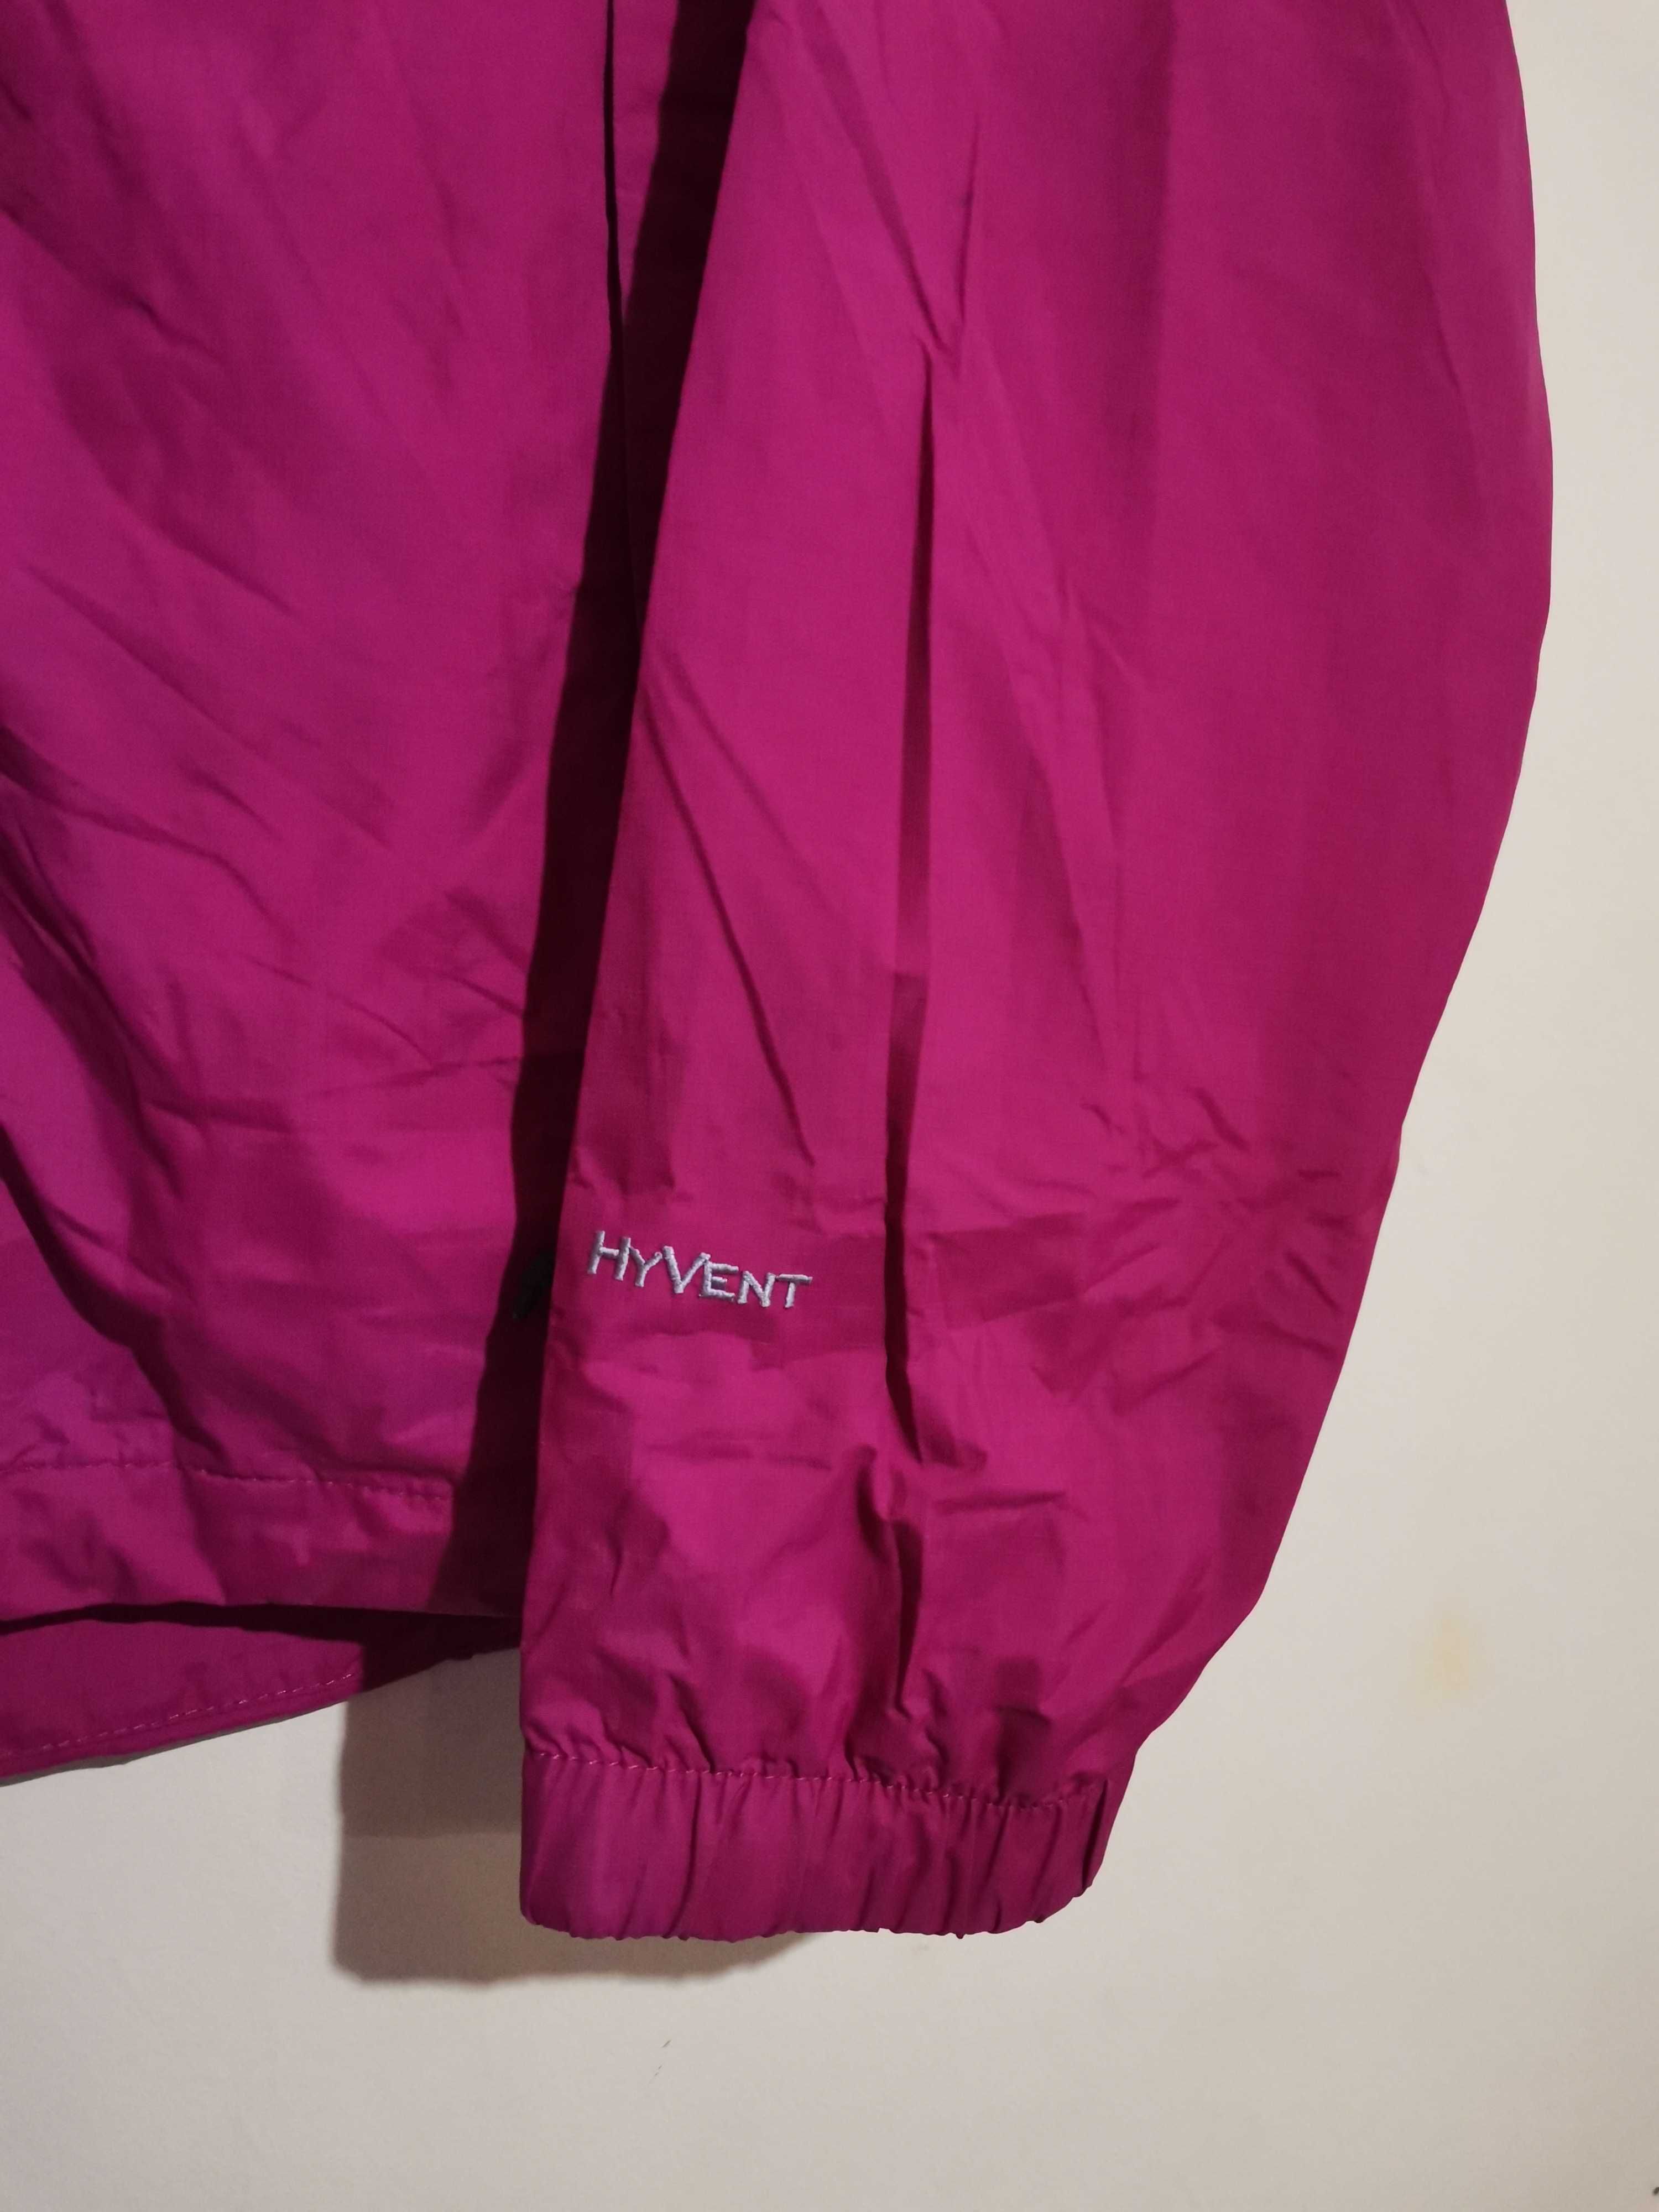 The North Face HyVent Jacket.